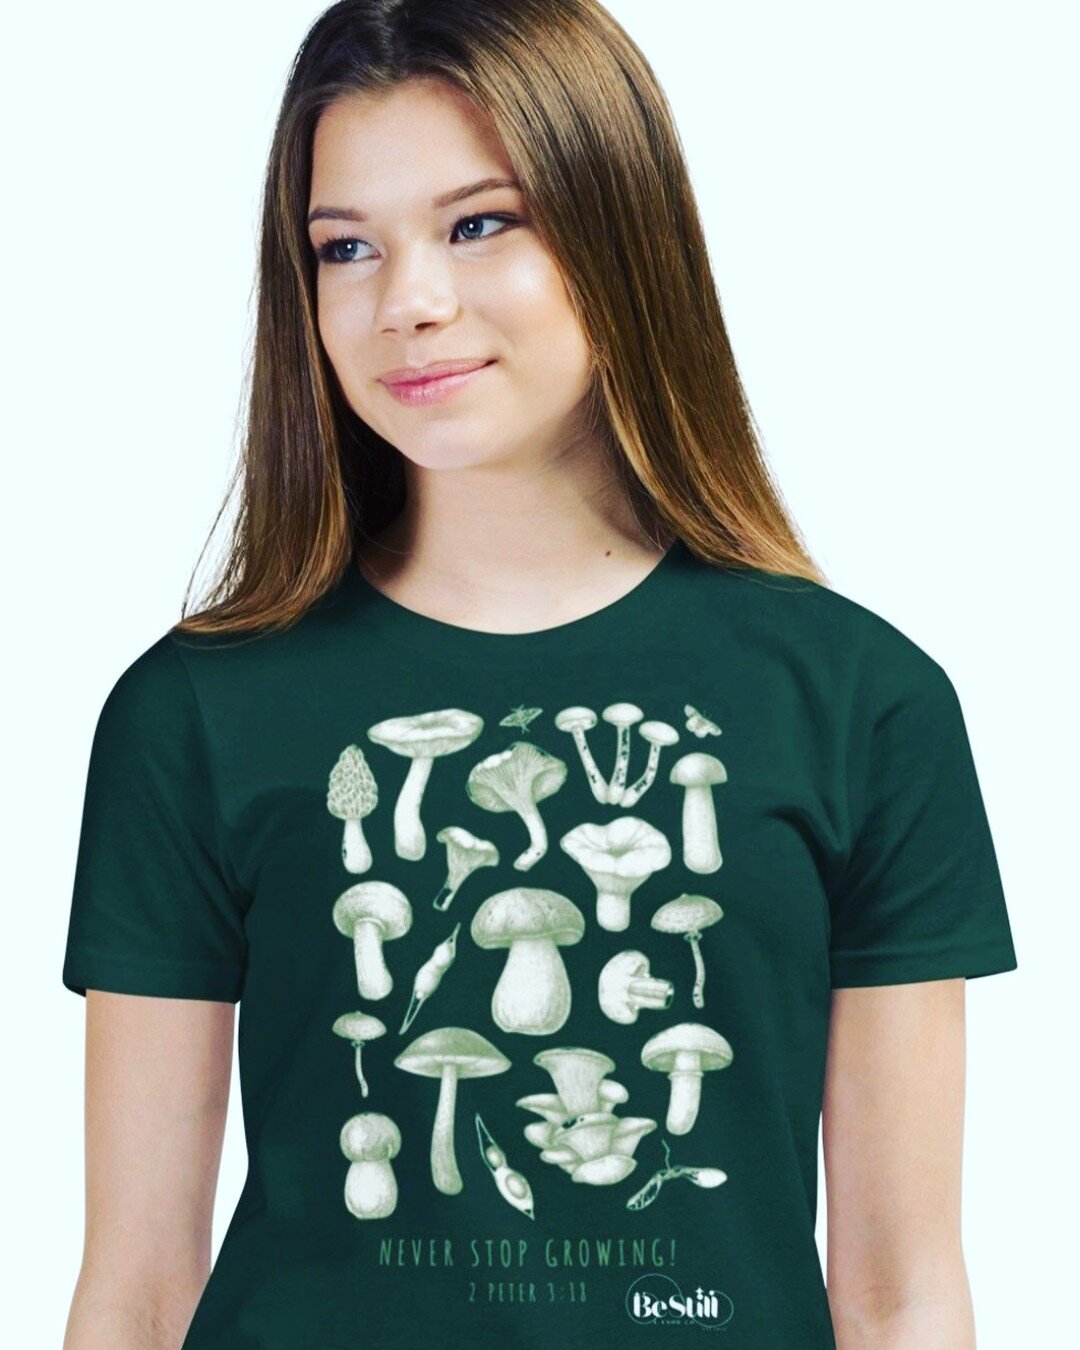 ***NEW PRODUCT ALERT!!!***

NEVER STOP GROWING 2 Peter 3:18 Youth Tee comes in four different colors and is so buttery soft...you can almost taste those mushrooms. 

***LINK IN BIO*** to shop. 

#bestill
#bestillandknowco